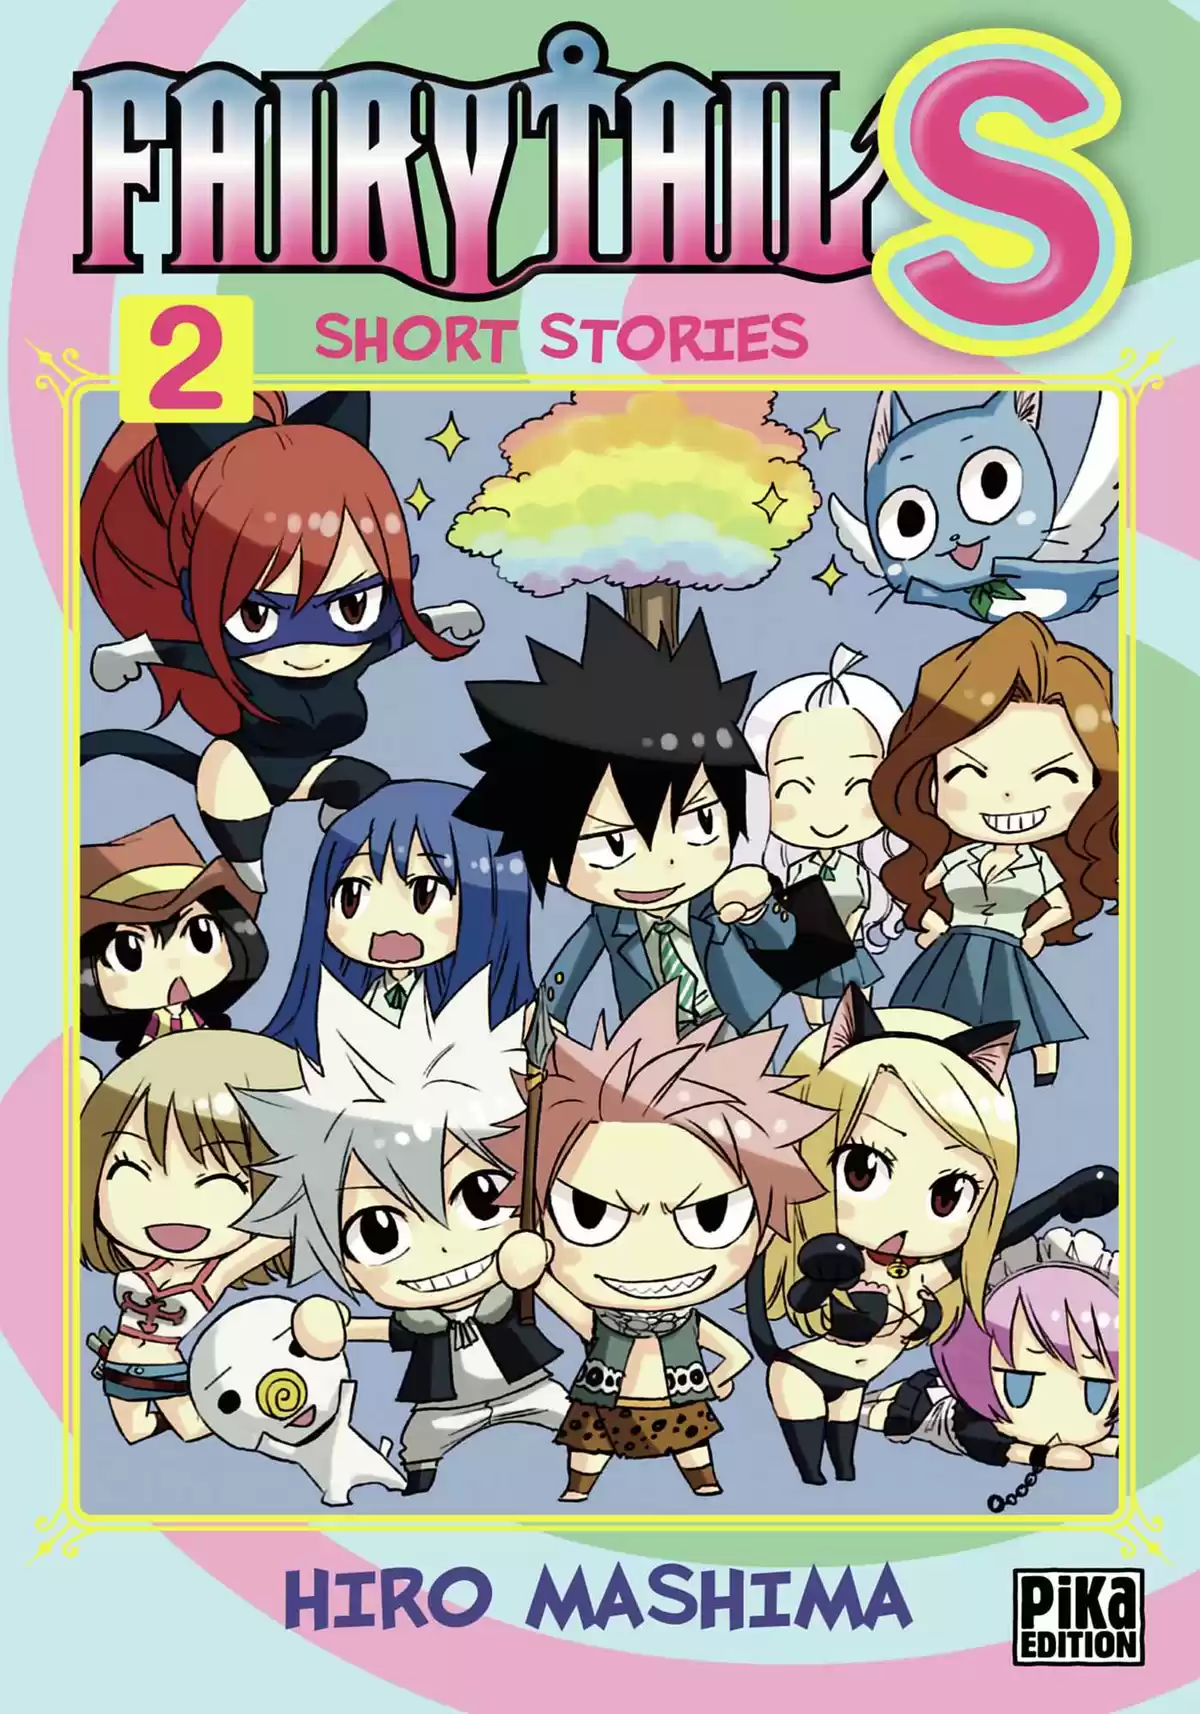 Fairy Tail S Volume 2 page 1